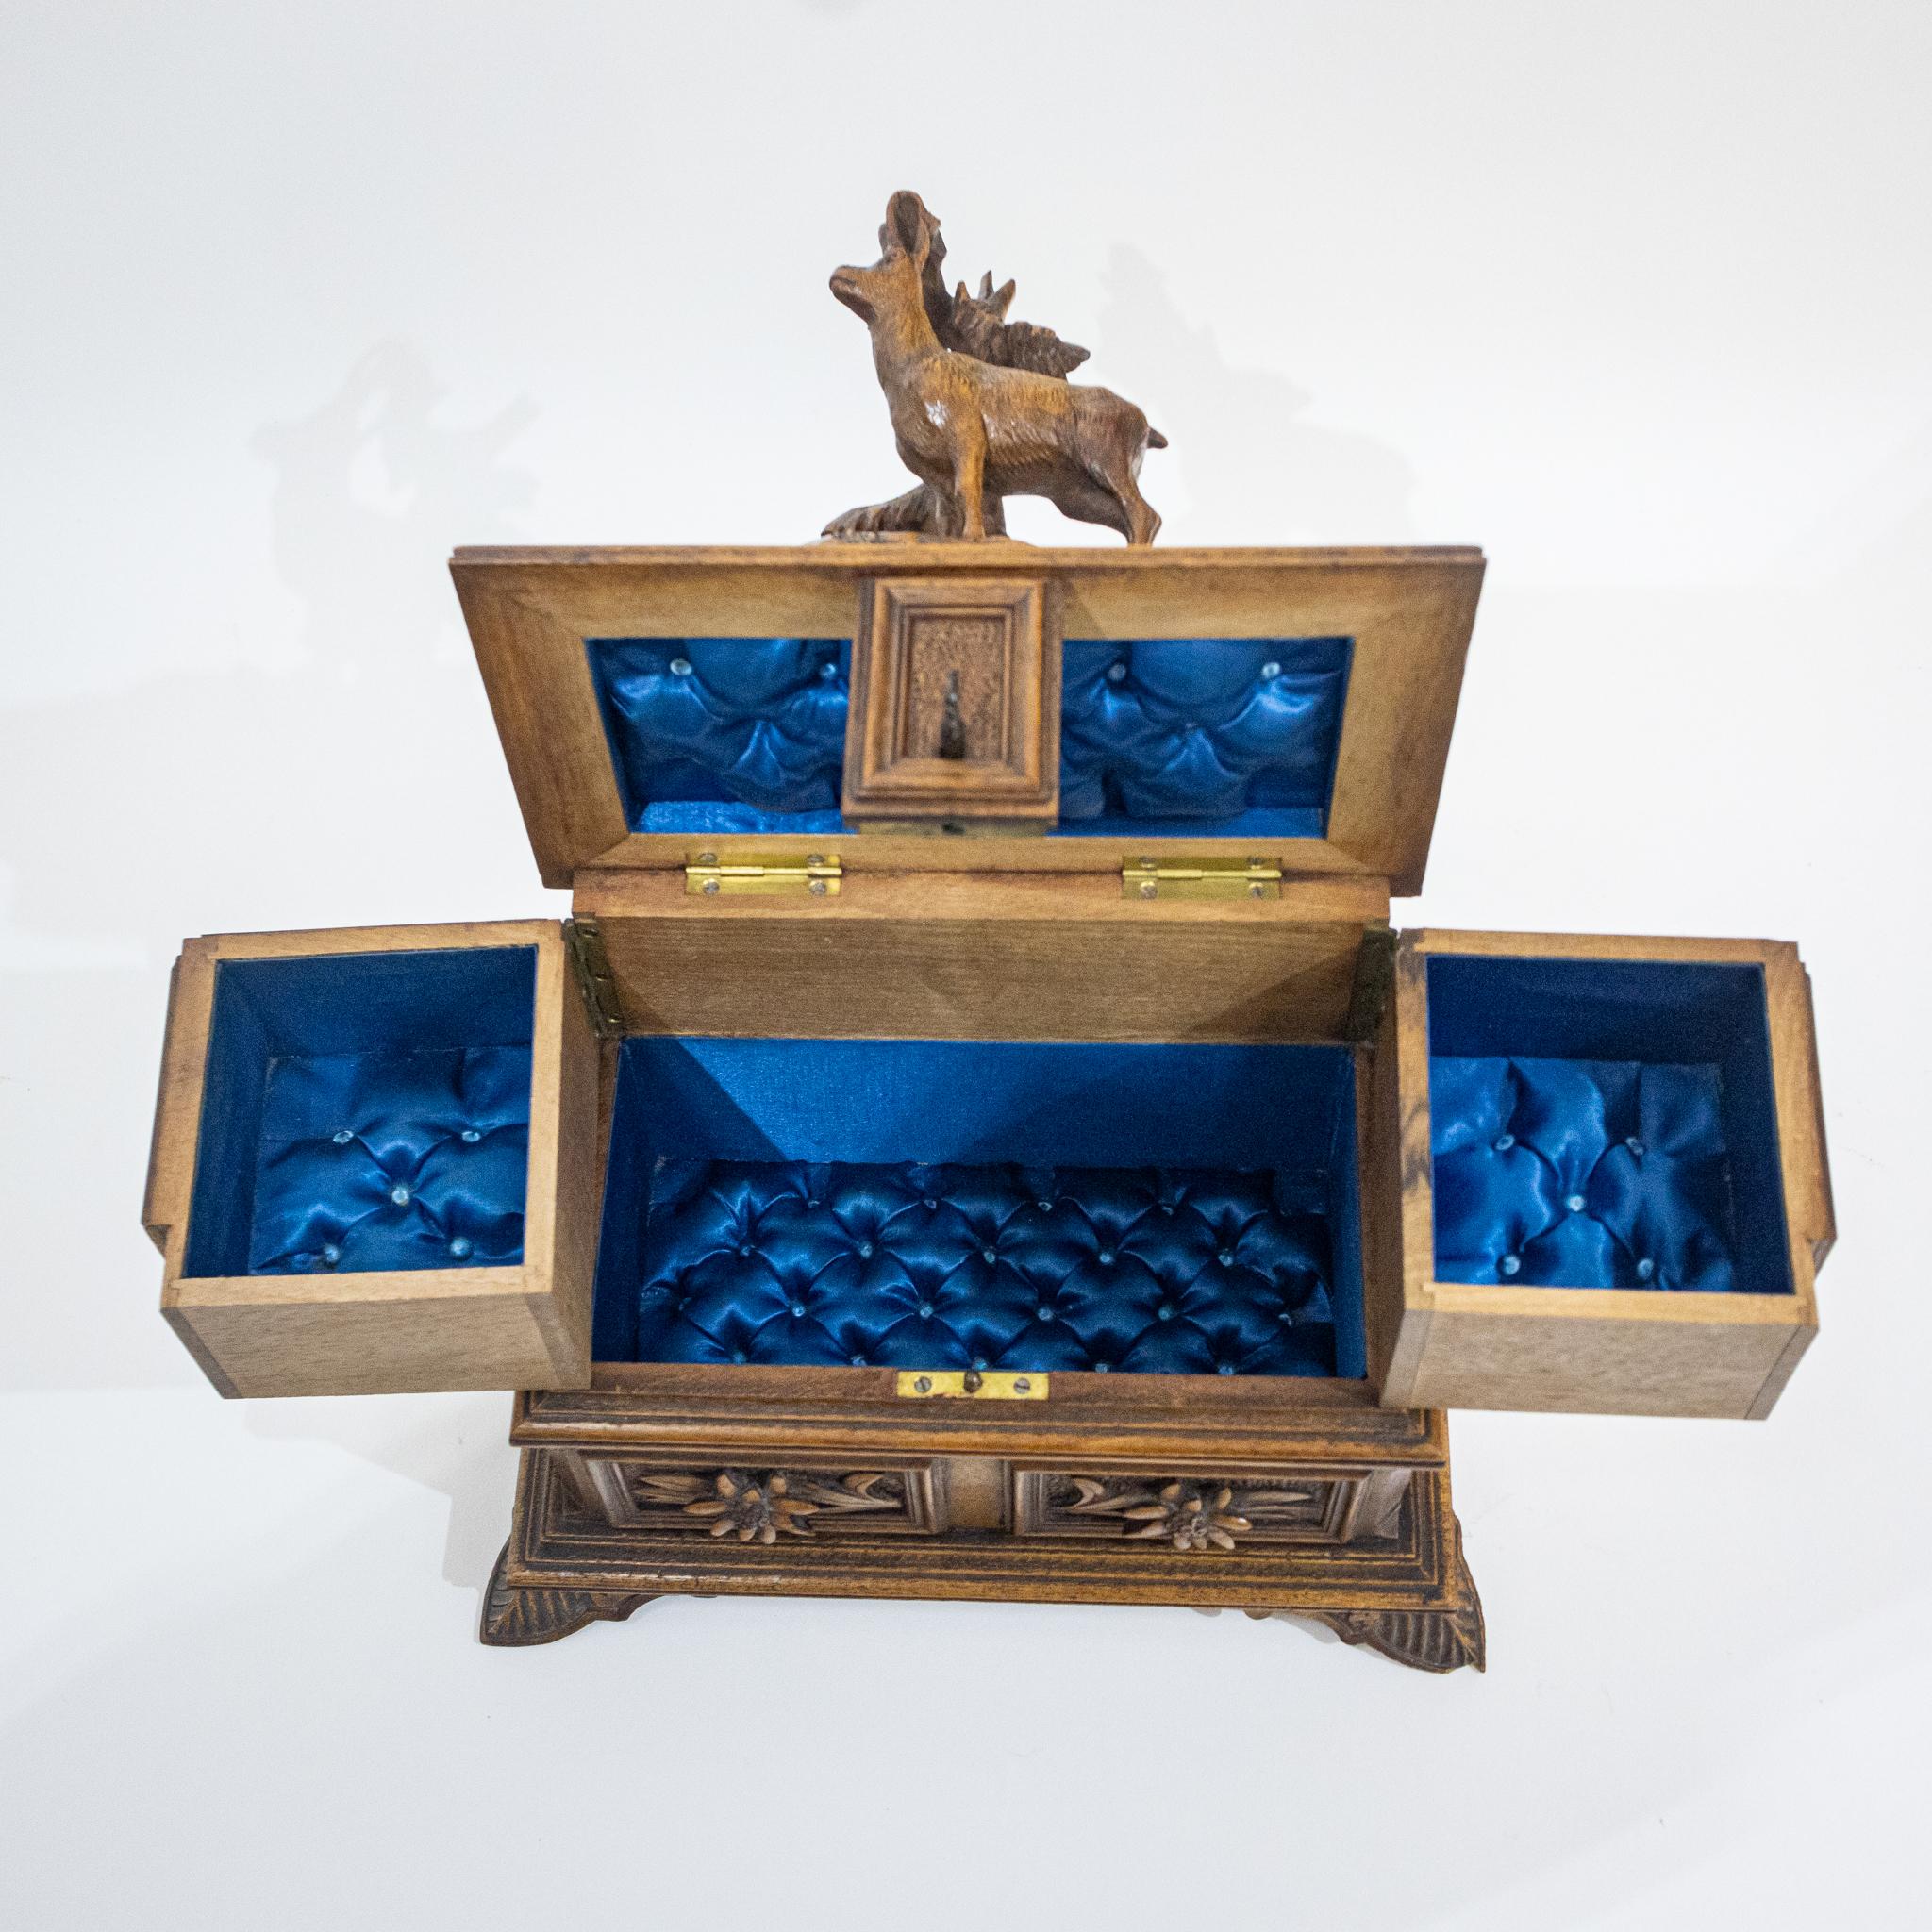 This exquisite early 20th Century Black Forest walnut jewellery box is a true testament to the craftsmanship of its time. Its exterior features intricate carvings of a graceful Chamois goat surrounded by delicate Edelweiss flowers, evoking the charm